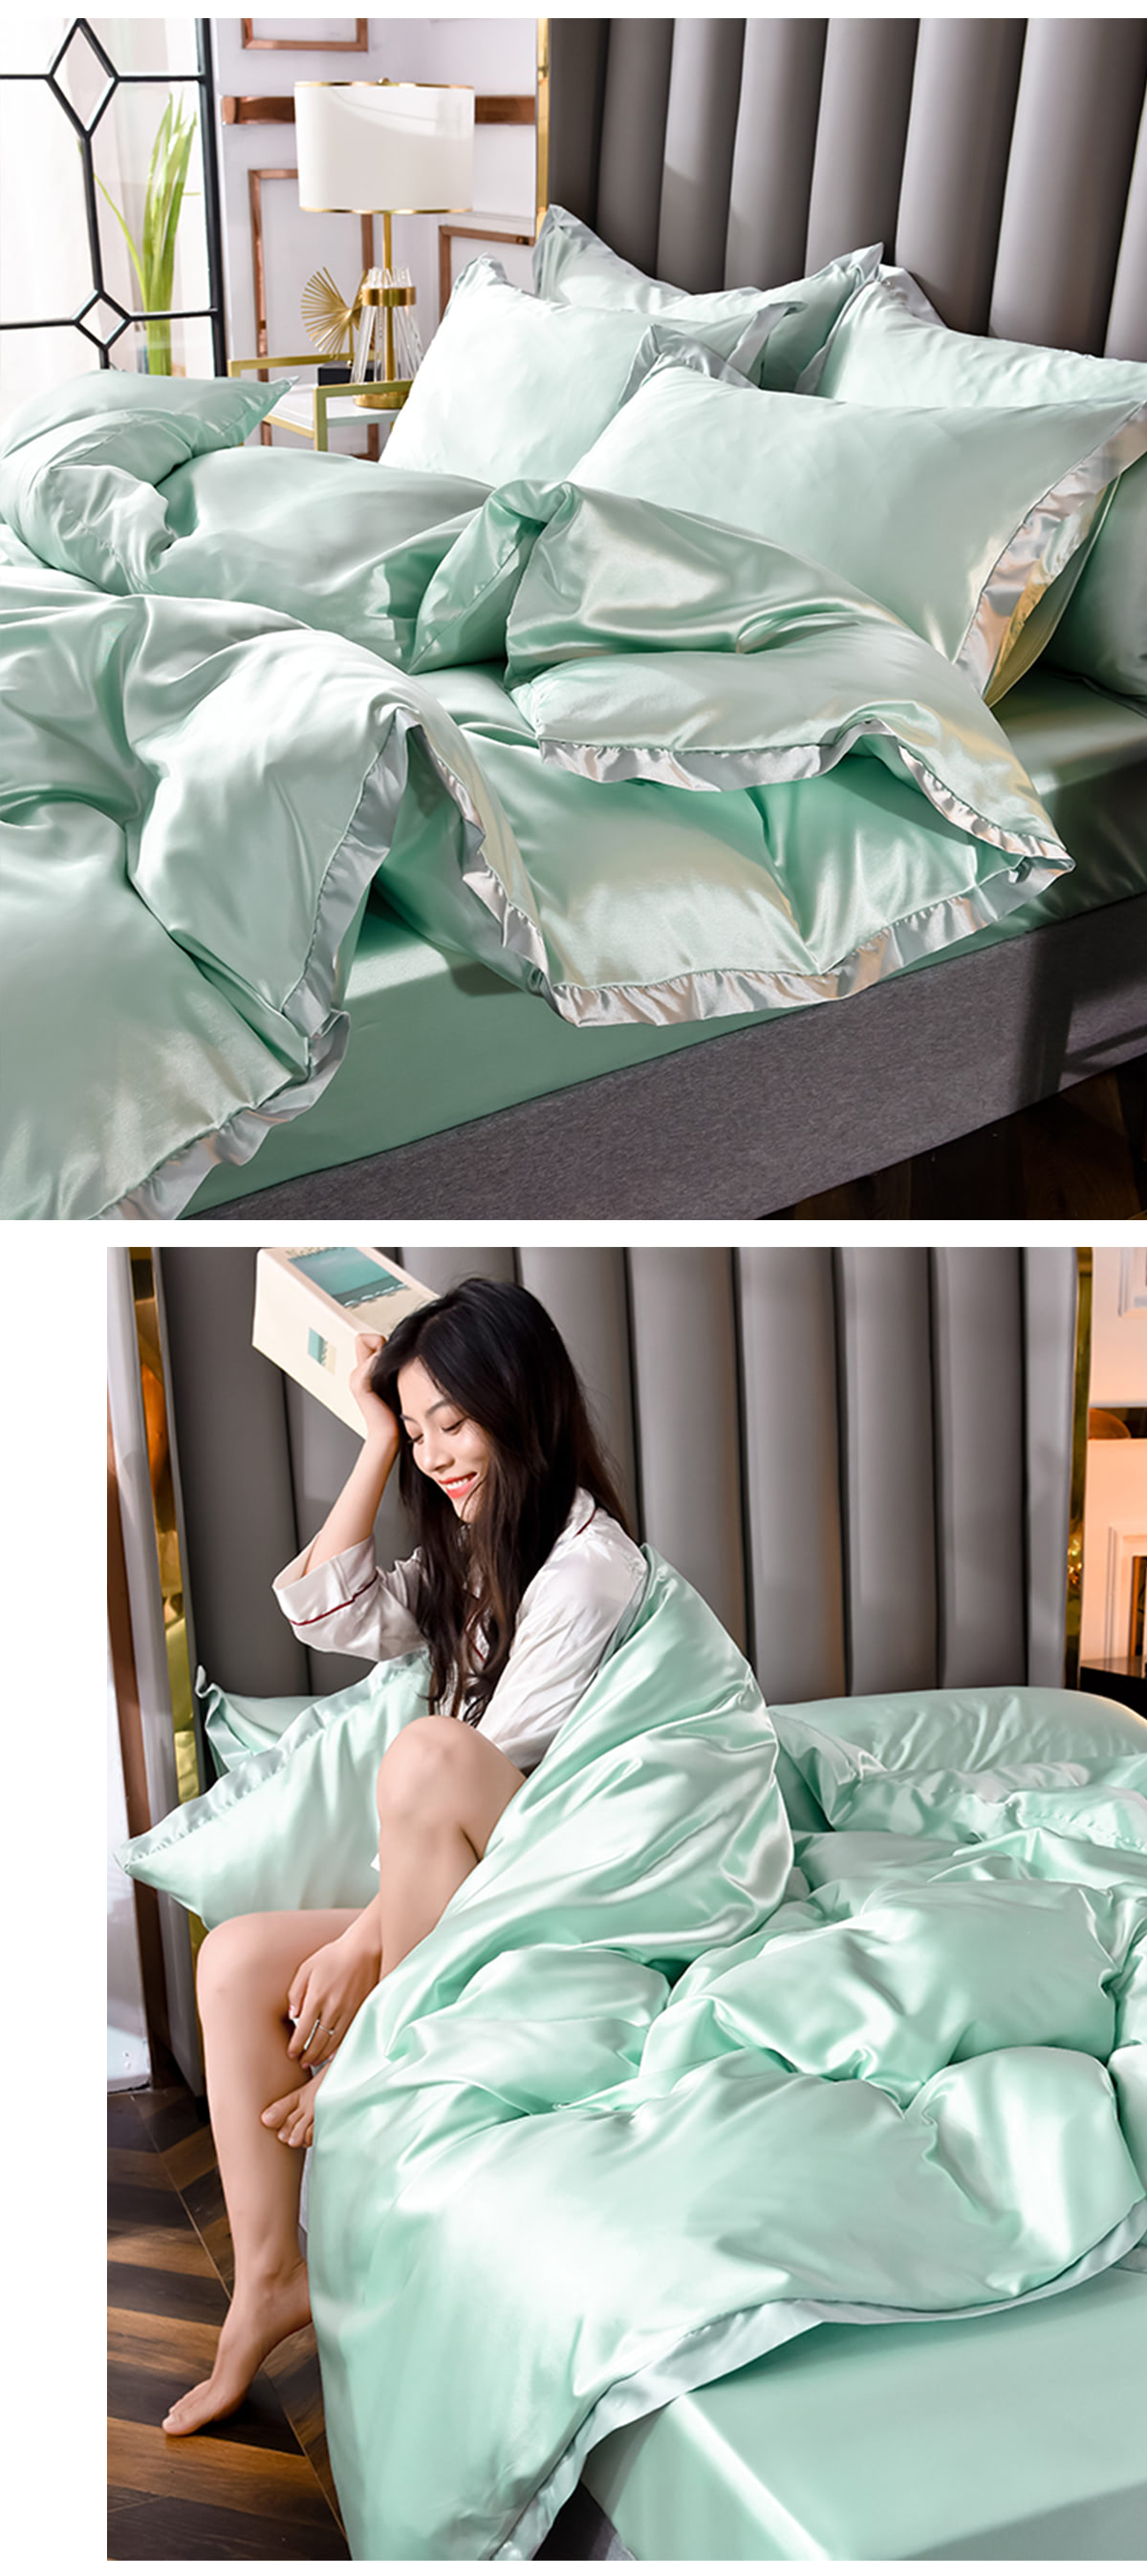 Fresh-and-Soft-Comfortable-Satin-Bed-Cover-Sheet-Set22.jpg